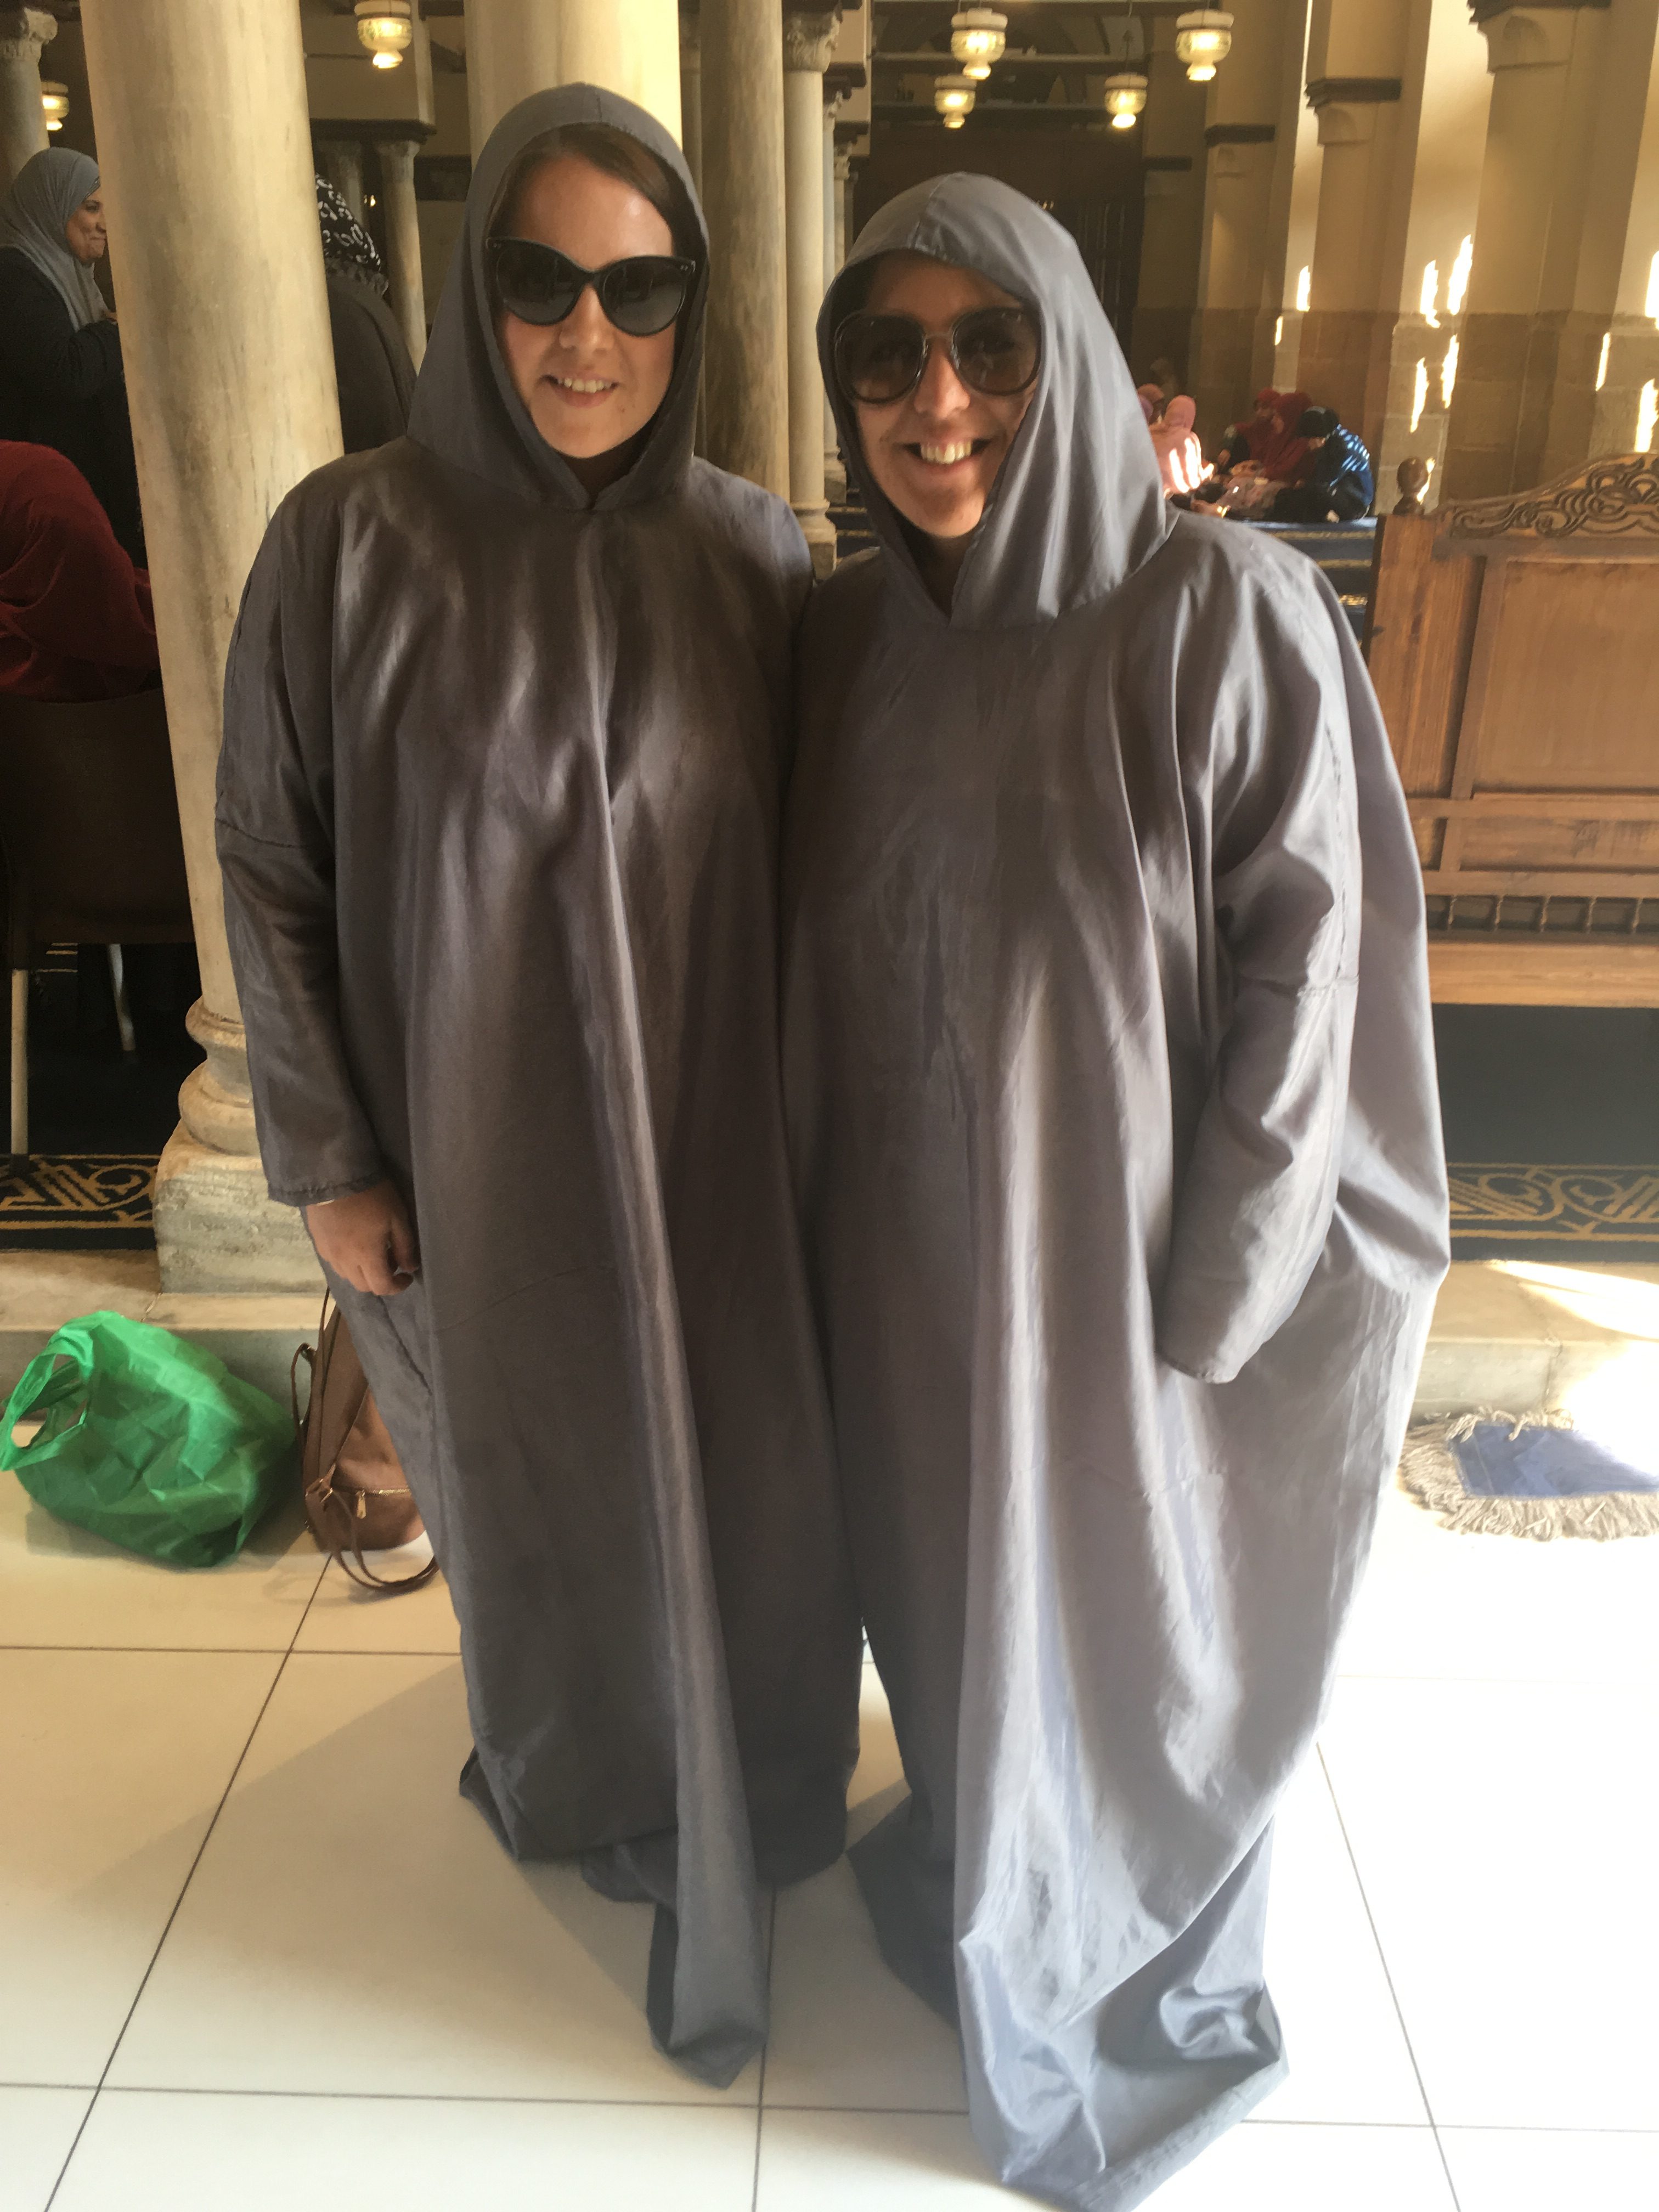 Amy & I at El-Azhar Mosque in our robe-like garment - courtesy of: Mike Sloan